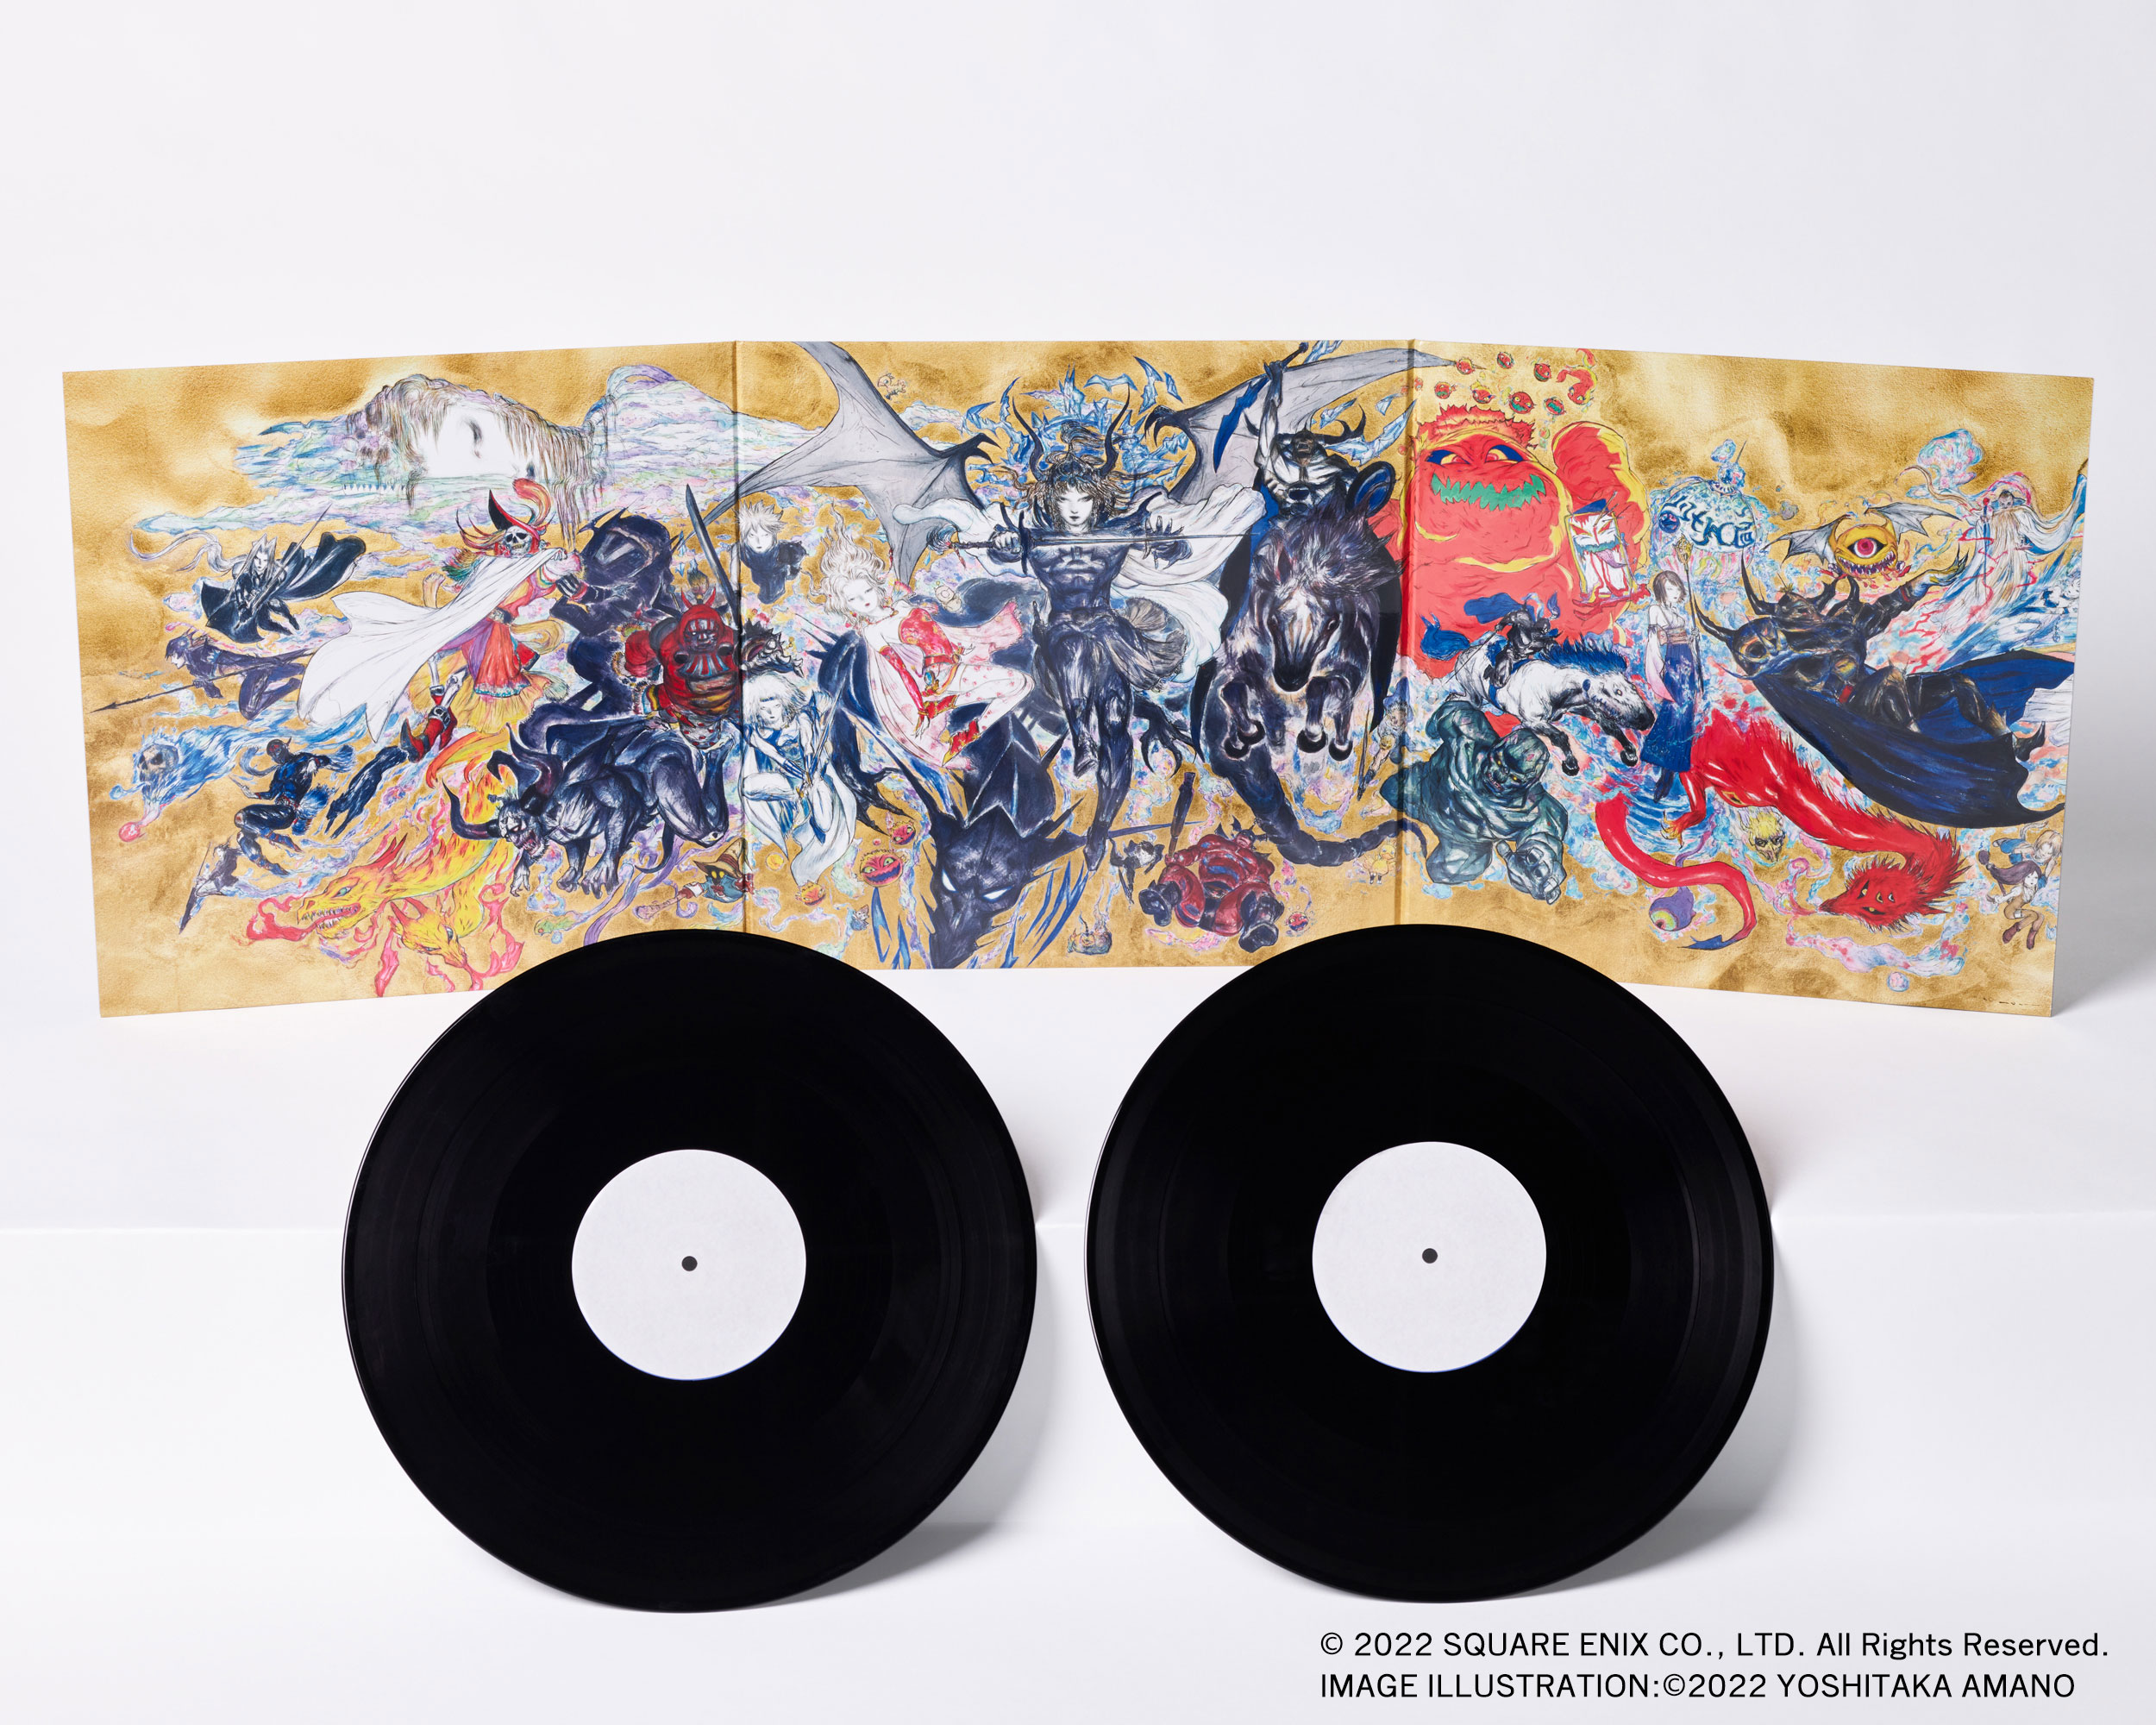 FINAL FANTASY Series 35th Anniversary Orchestral Compilation Vinyl